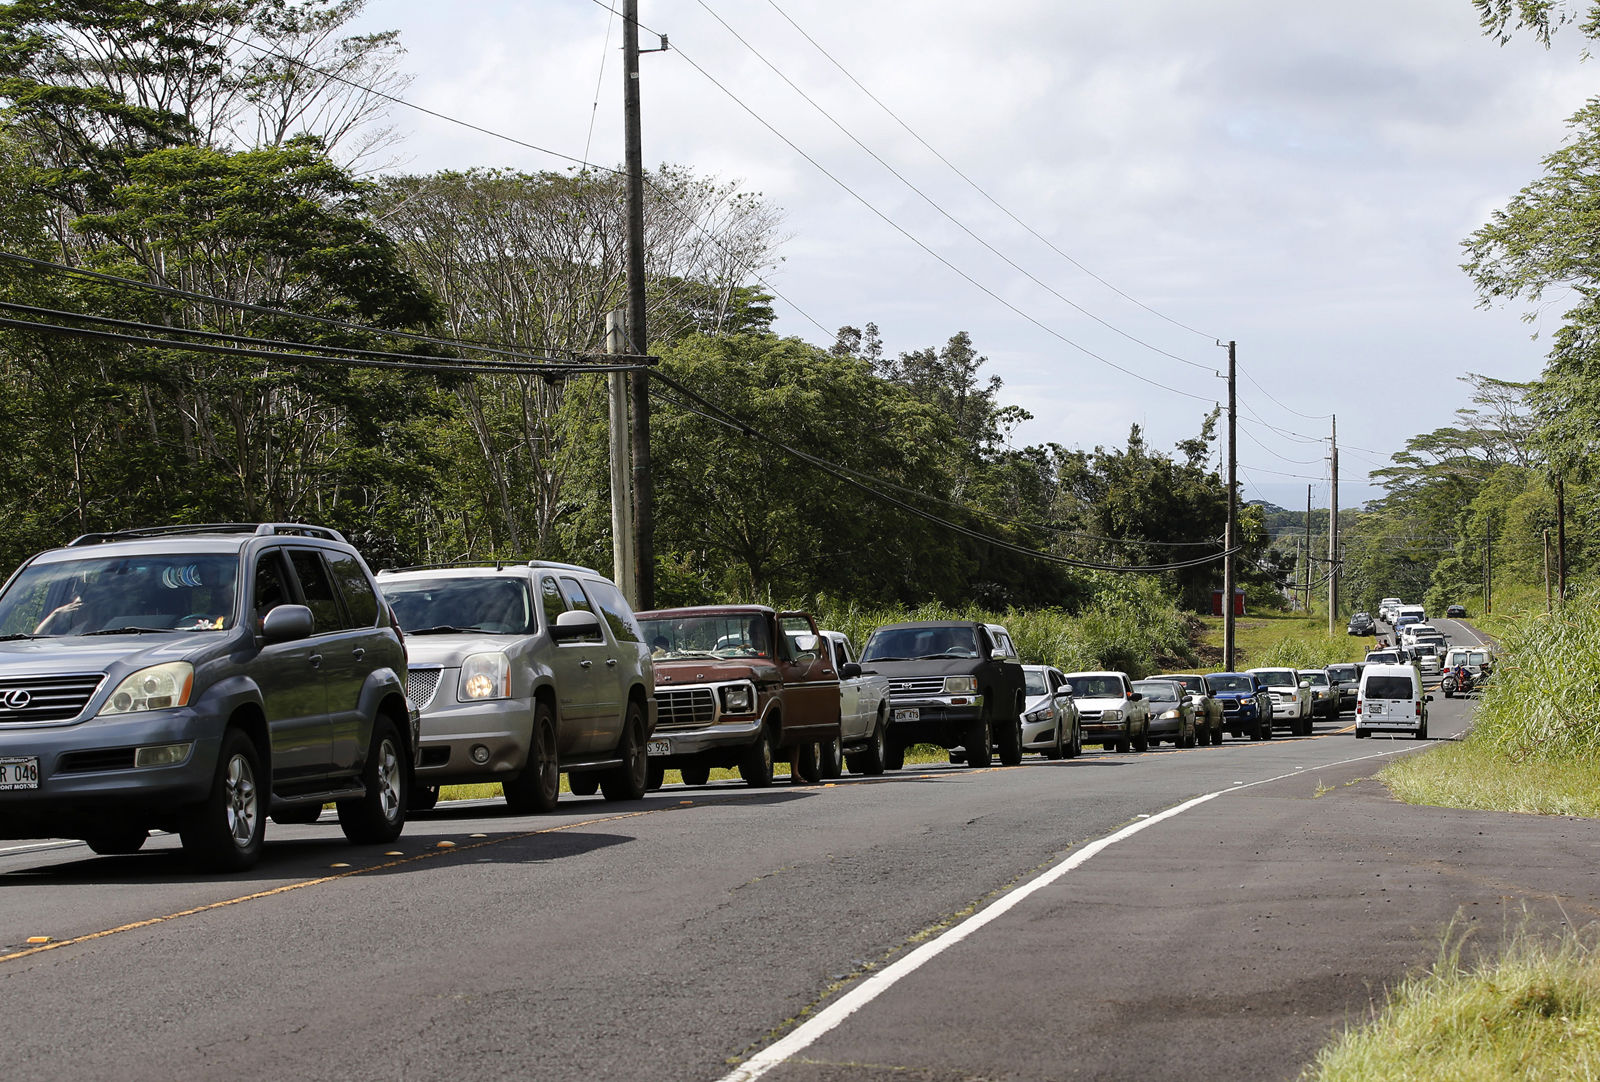 Residents of the Leilani Estates queue in a line to enter the subdivision to gather possessions from their homes, Sunday, May 6, 2018, in Pahoa, Hawaii. Scientists reported lava spewing more than 200 feet (61 meters) into the air in Hawaii's recent Kilauea volcanic eruption, and some of the more than 1,700 people who evacuated prepared for the possibility they may not return for quite some time. (AP Photo/Marco Garcia)